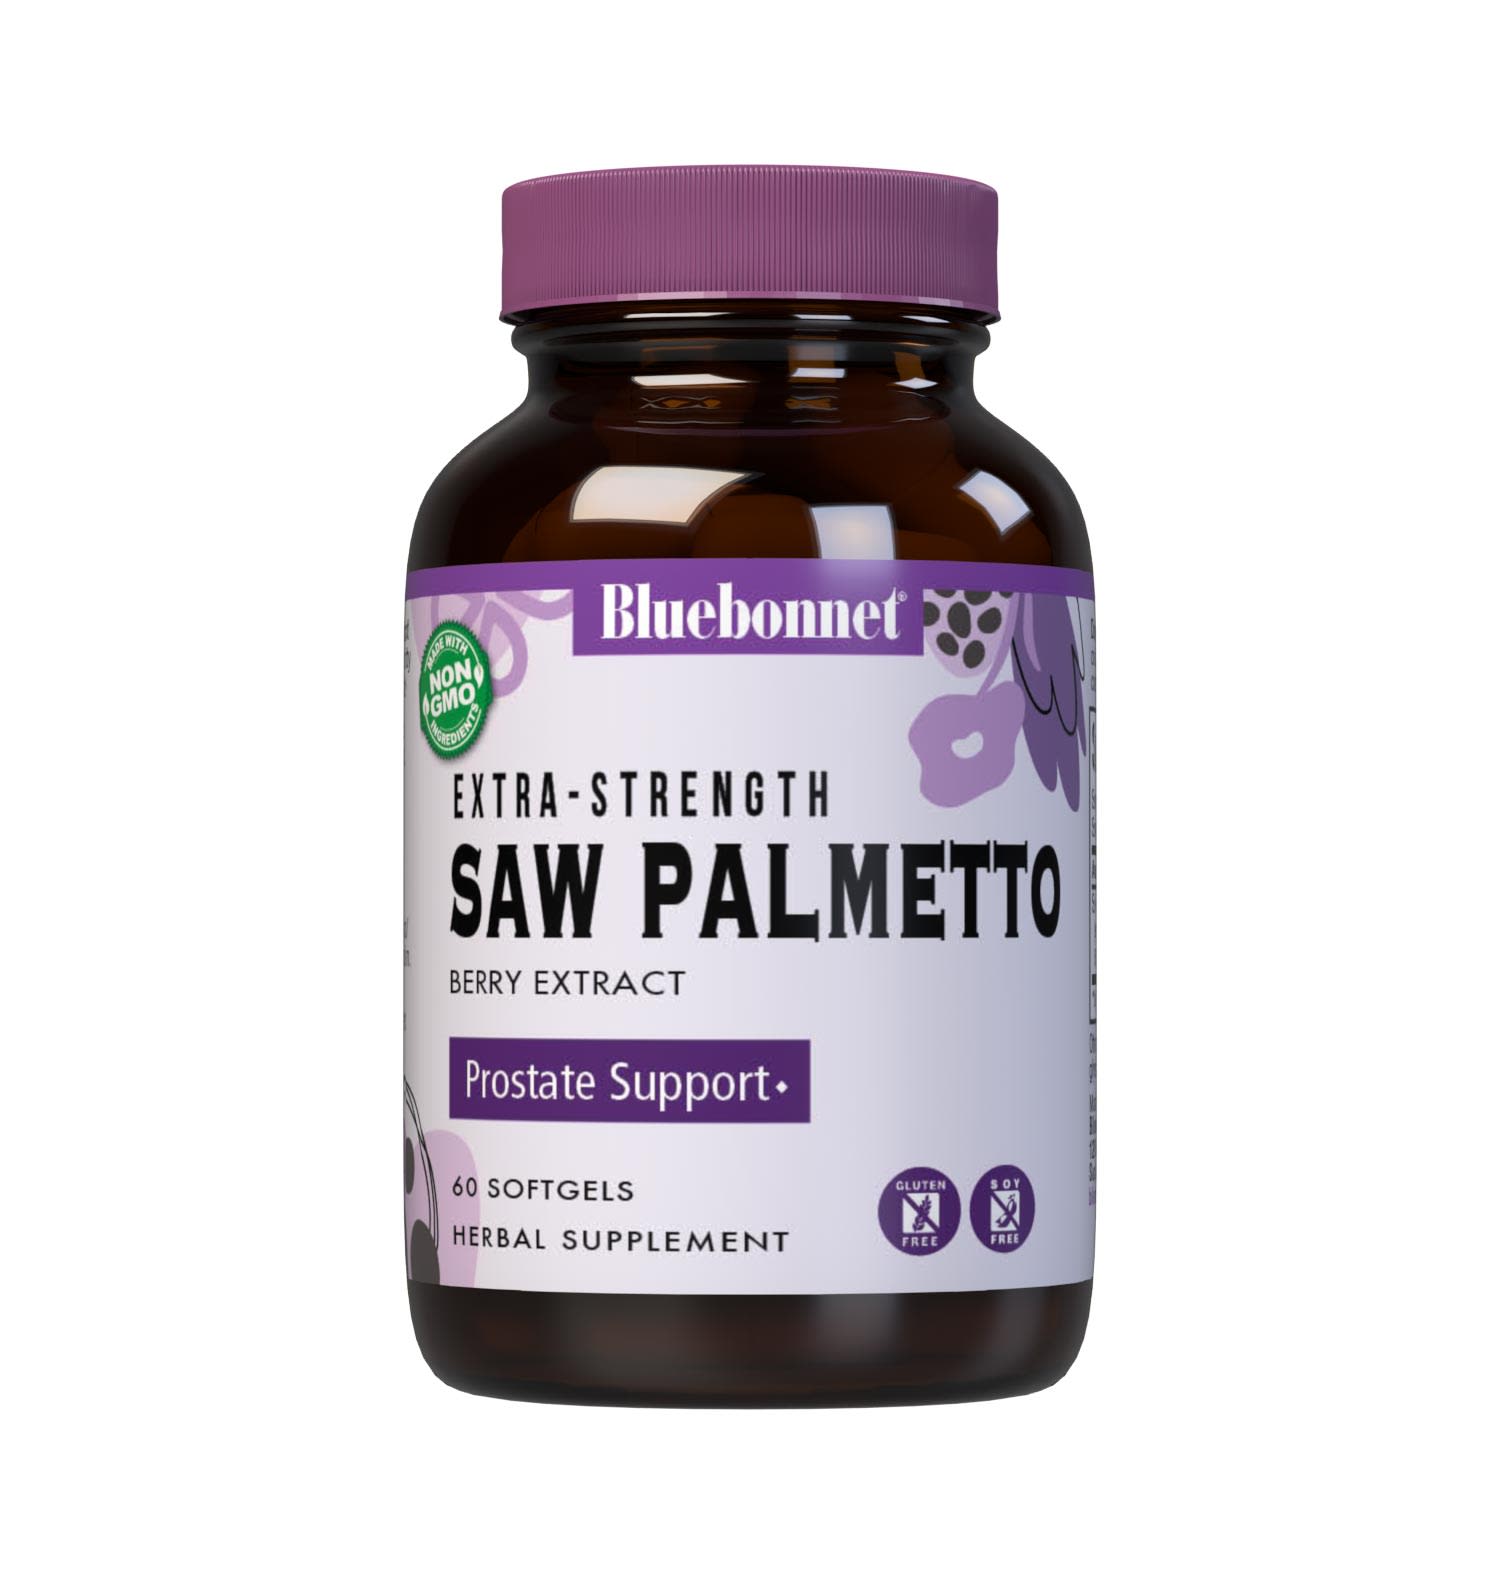 Bluebonnet’s Extra-Strength Saw Palmetto Berry Extract 60 Softgels contain a standardized extract of fatty acids and active sterols, the most researched active constituents found in saw palmetto. A clean and gentle supercritical CO2 extraction method is employed to capture and preserve saw palmetto’s most valuable components. #size_60 count